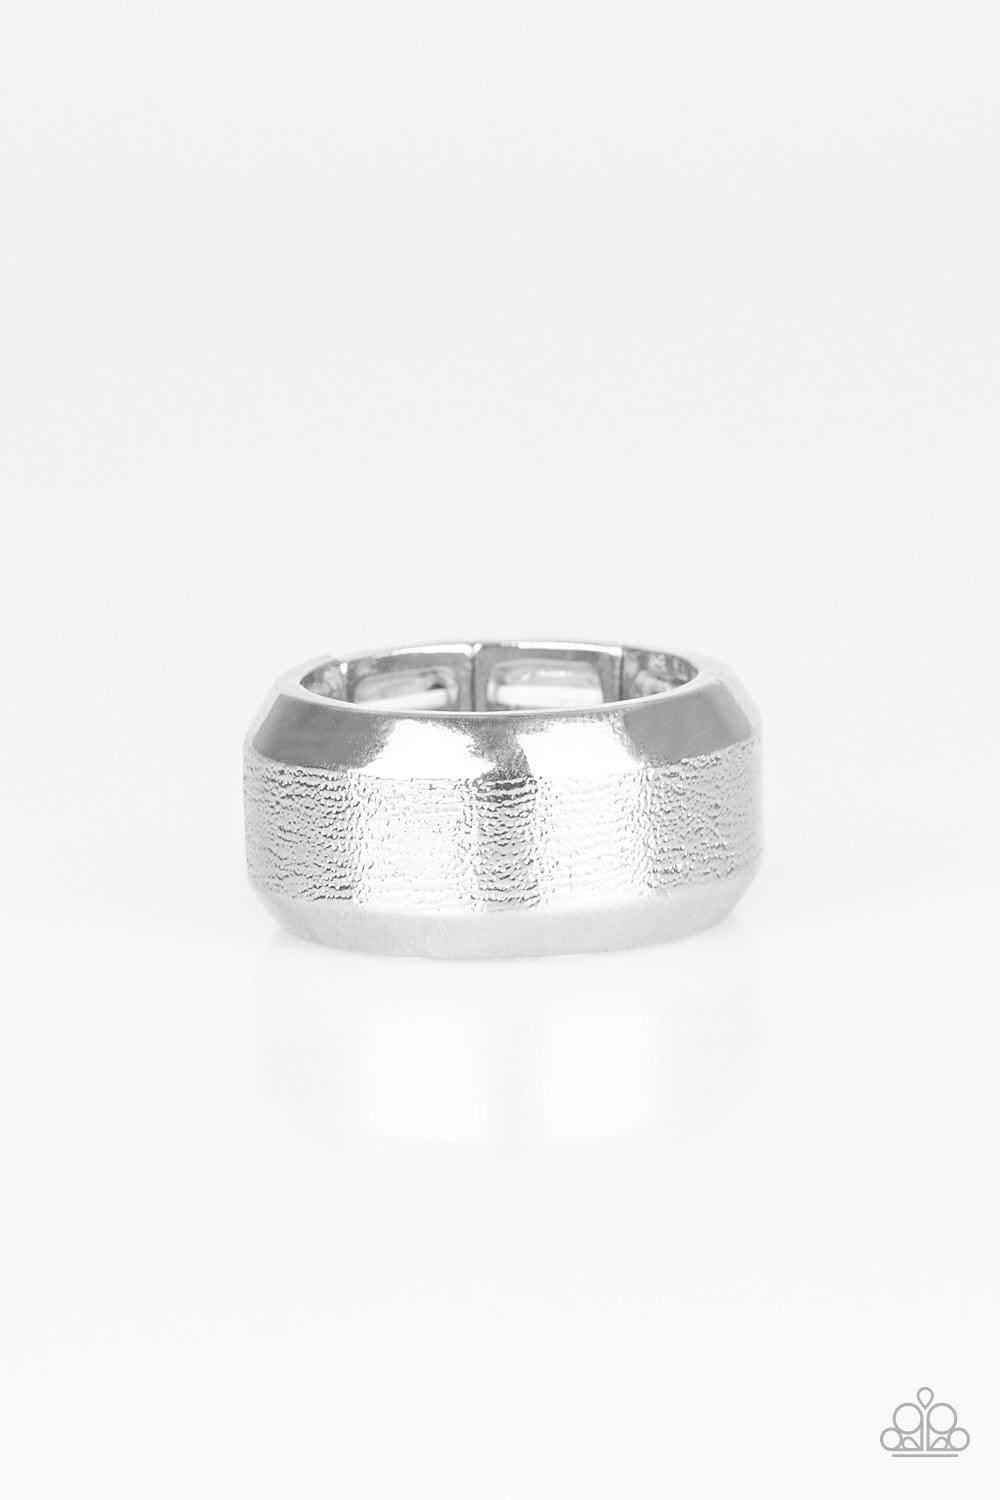 Paparazzi Accessories - Checkmate - Silver Men's Ring - Bling by JessieK